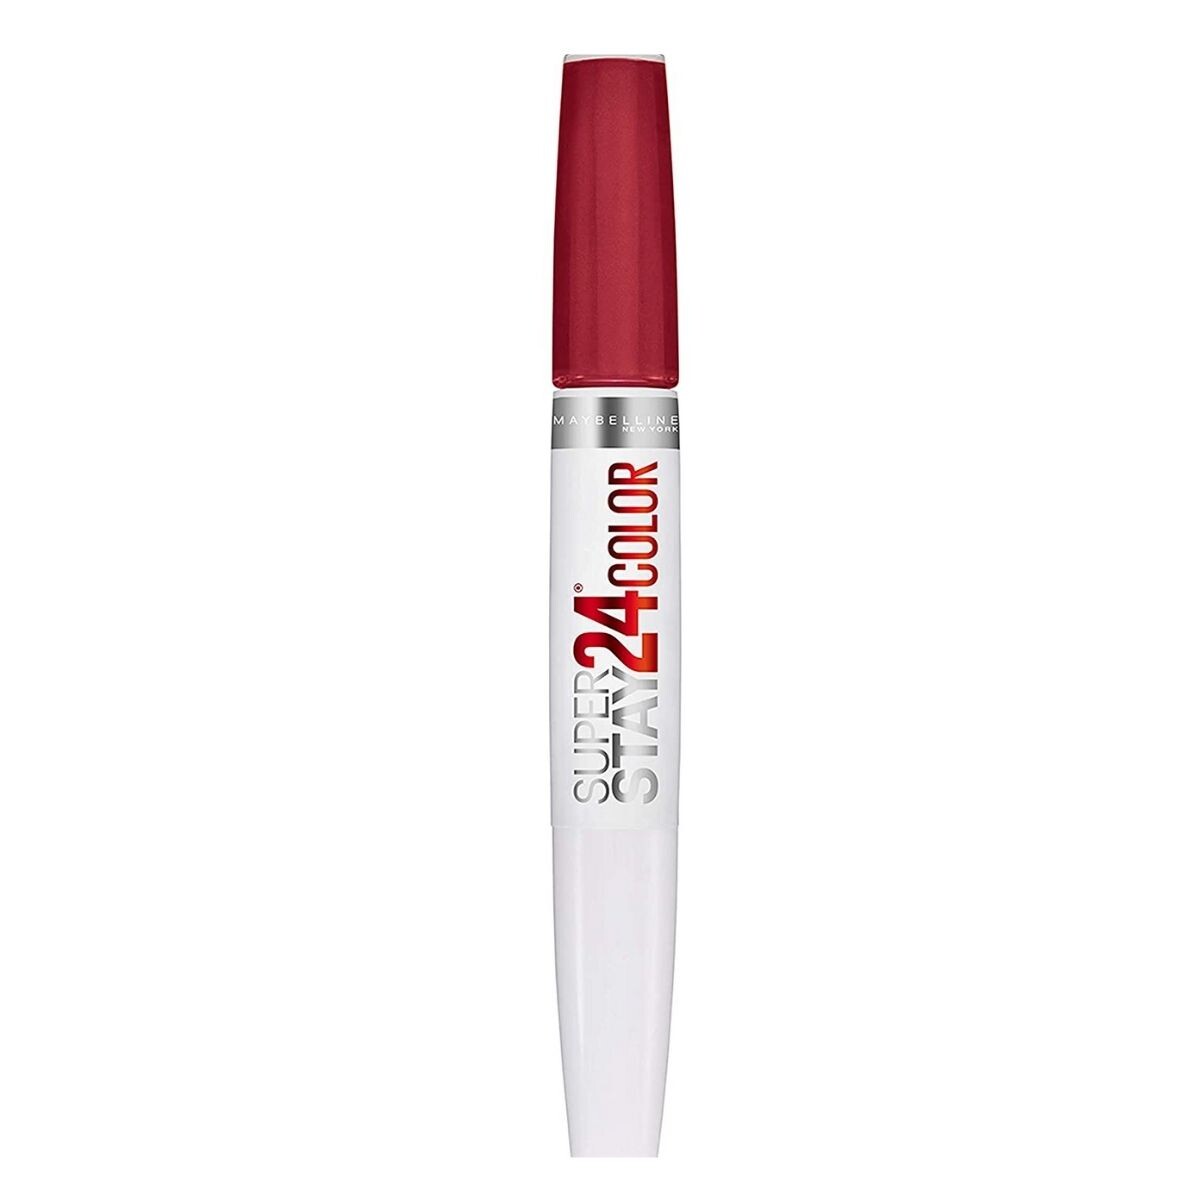 Labial Larga Duración Maybelline SuperStay 24 Smille - Keep Up The Flam 